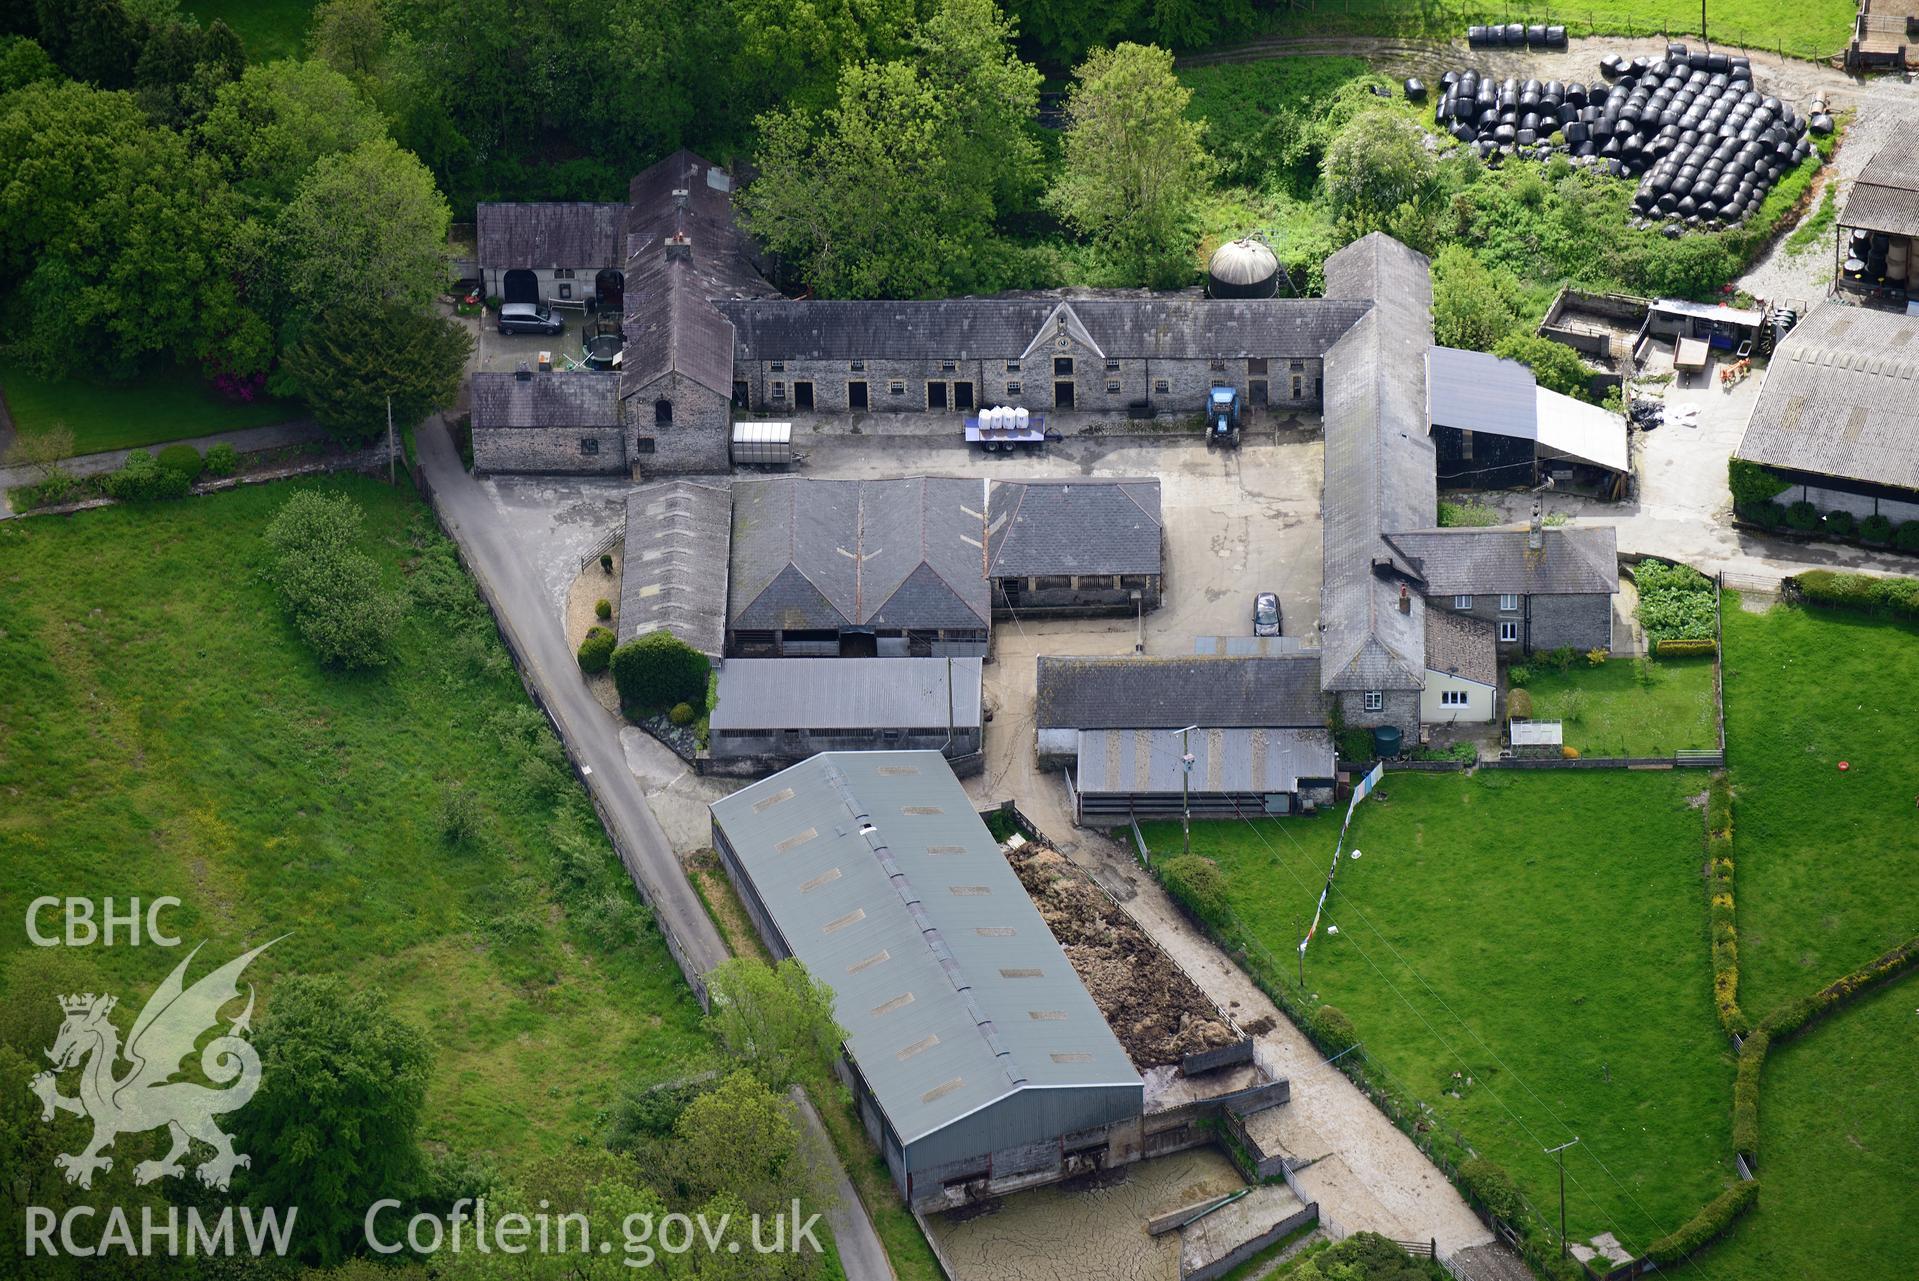 Falcondale Home Farm and Coach House, Lampeter. Oblique aerial photograph taken during the Royal Commission's programme of archaeological aerial reconnaissance by Toby Driver on 3rd June 2015.